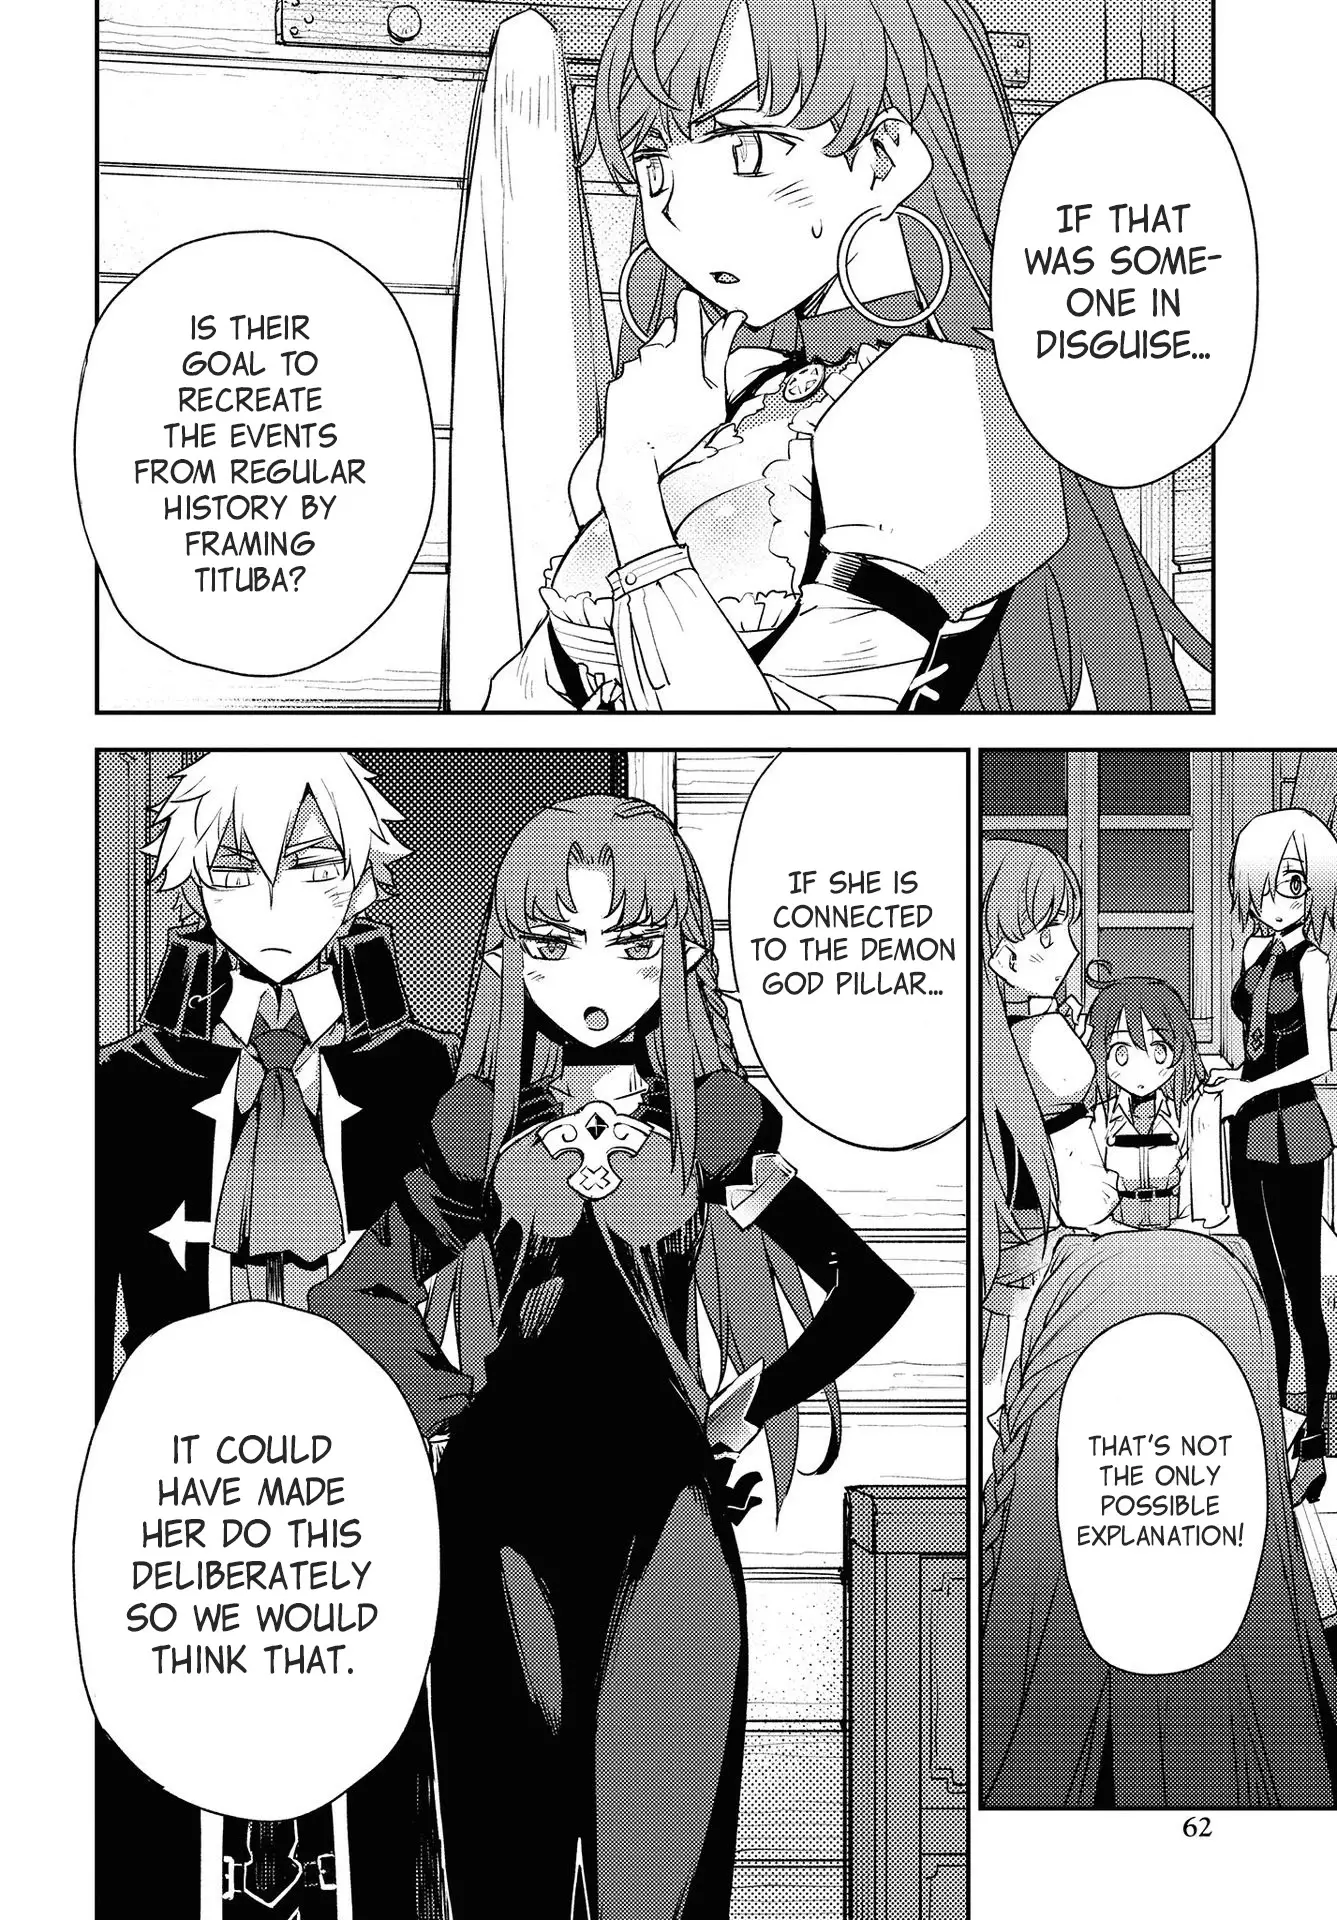 Fate/grand Order: Epic Of Remnant - Subspecies Singularity Iv: Taboo Advent Salem: Salem Of Heresy - 9 page 9